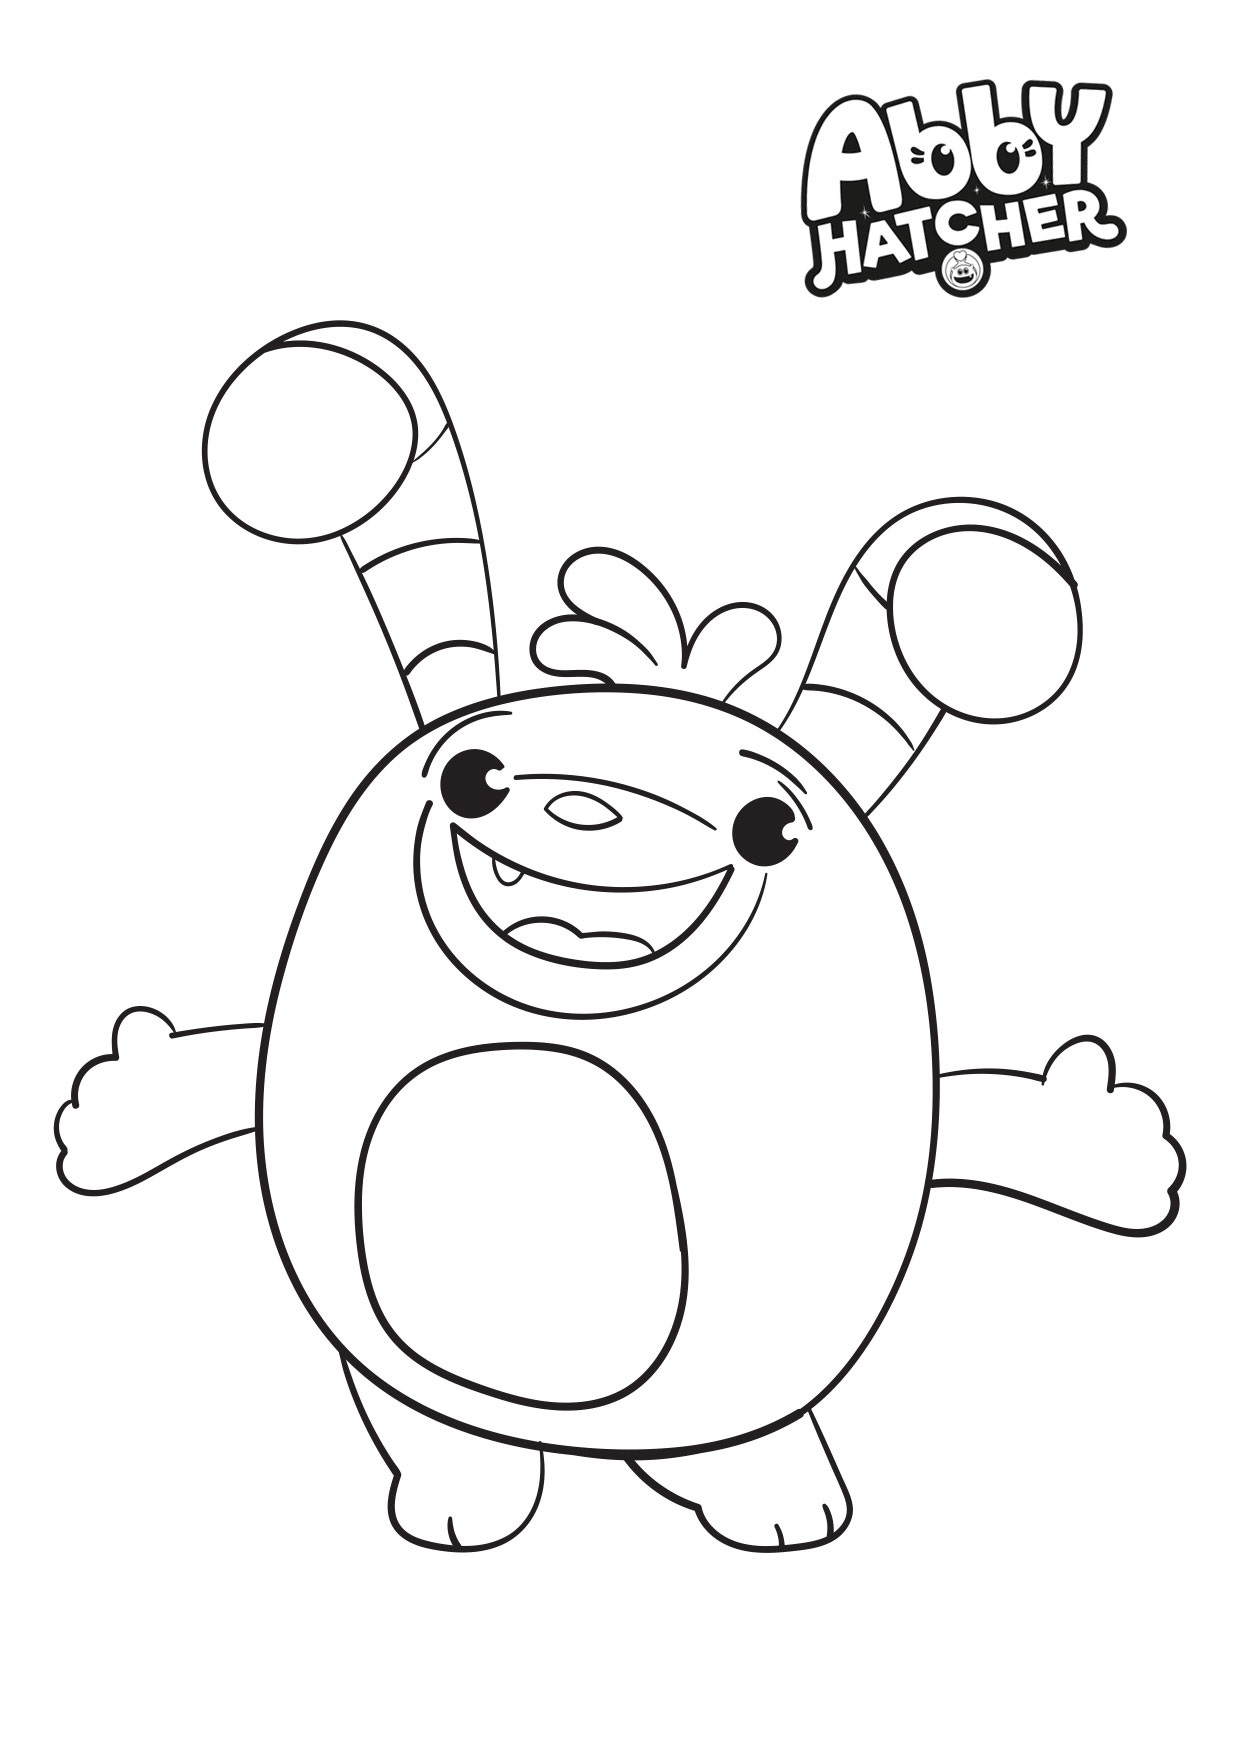 abby-hatcher-with-friends-coloring-pages-free-printable-coloring-pages